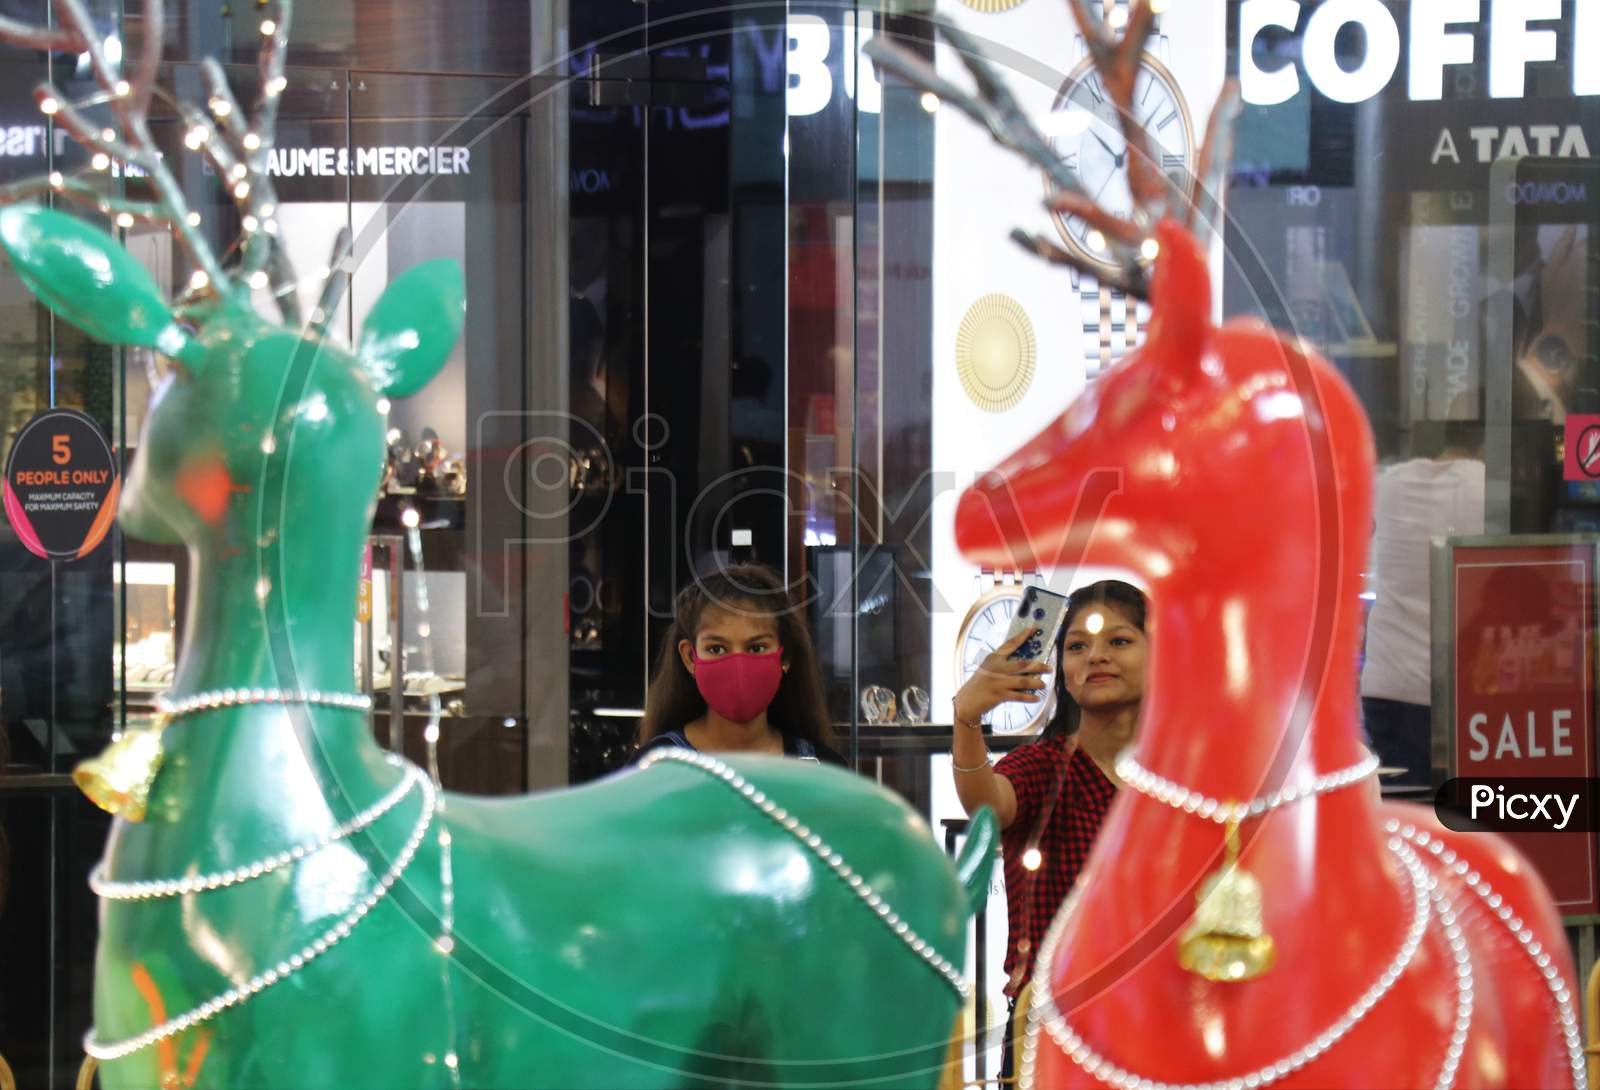 People wearing protective masks walk past Christmas decorations inside a mall, amid the spread of the coronavirus disease (COVID-19) in Mumbai, India, December, 2020.